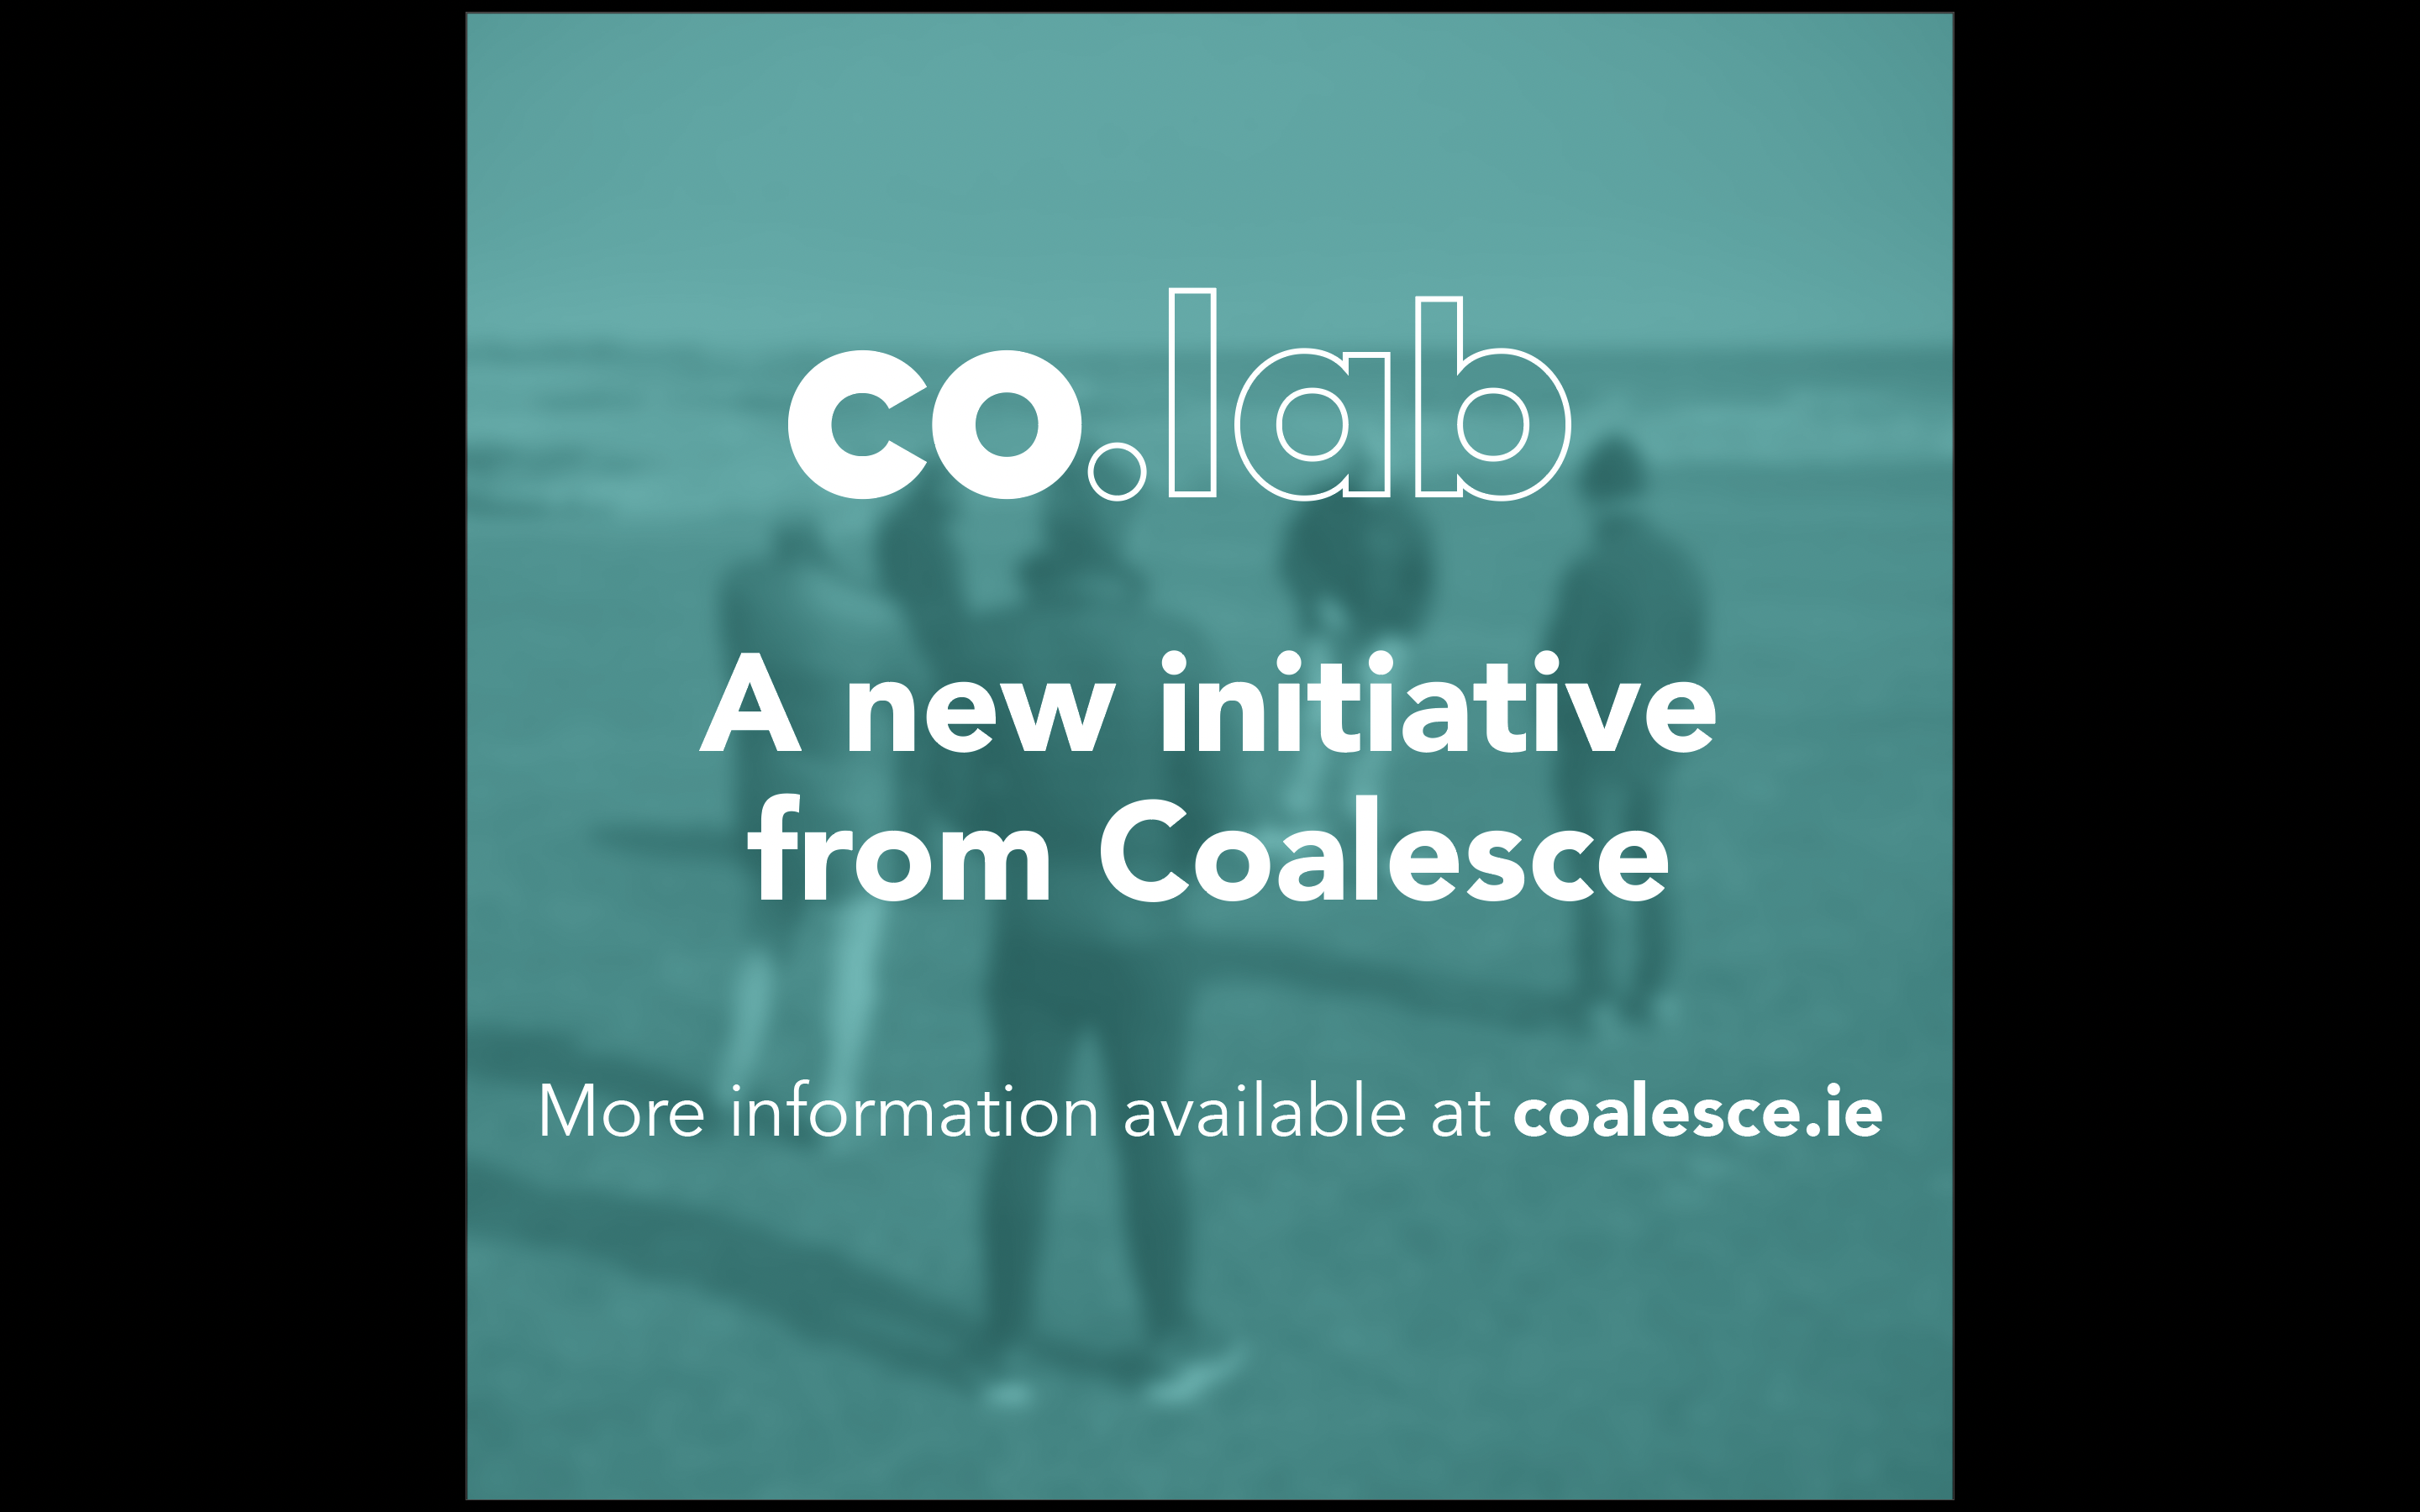 Co.Lab? So what's its all about...